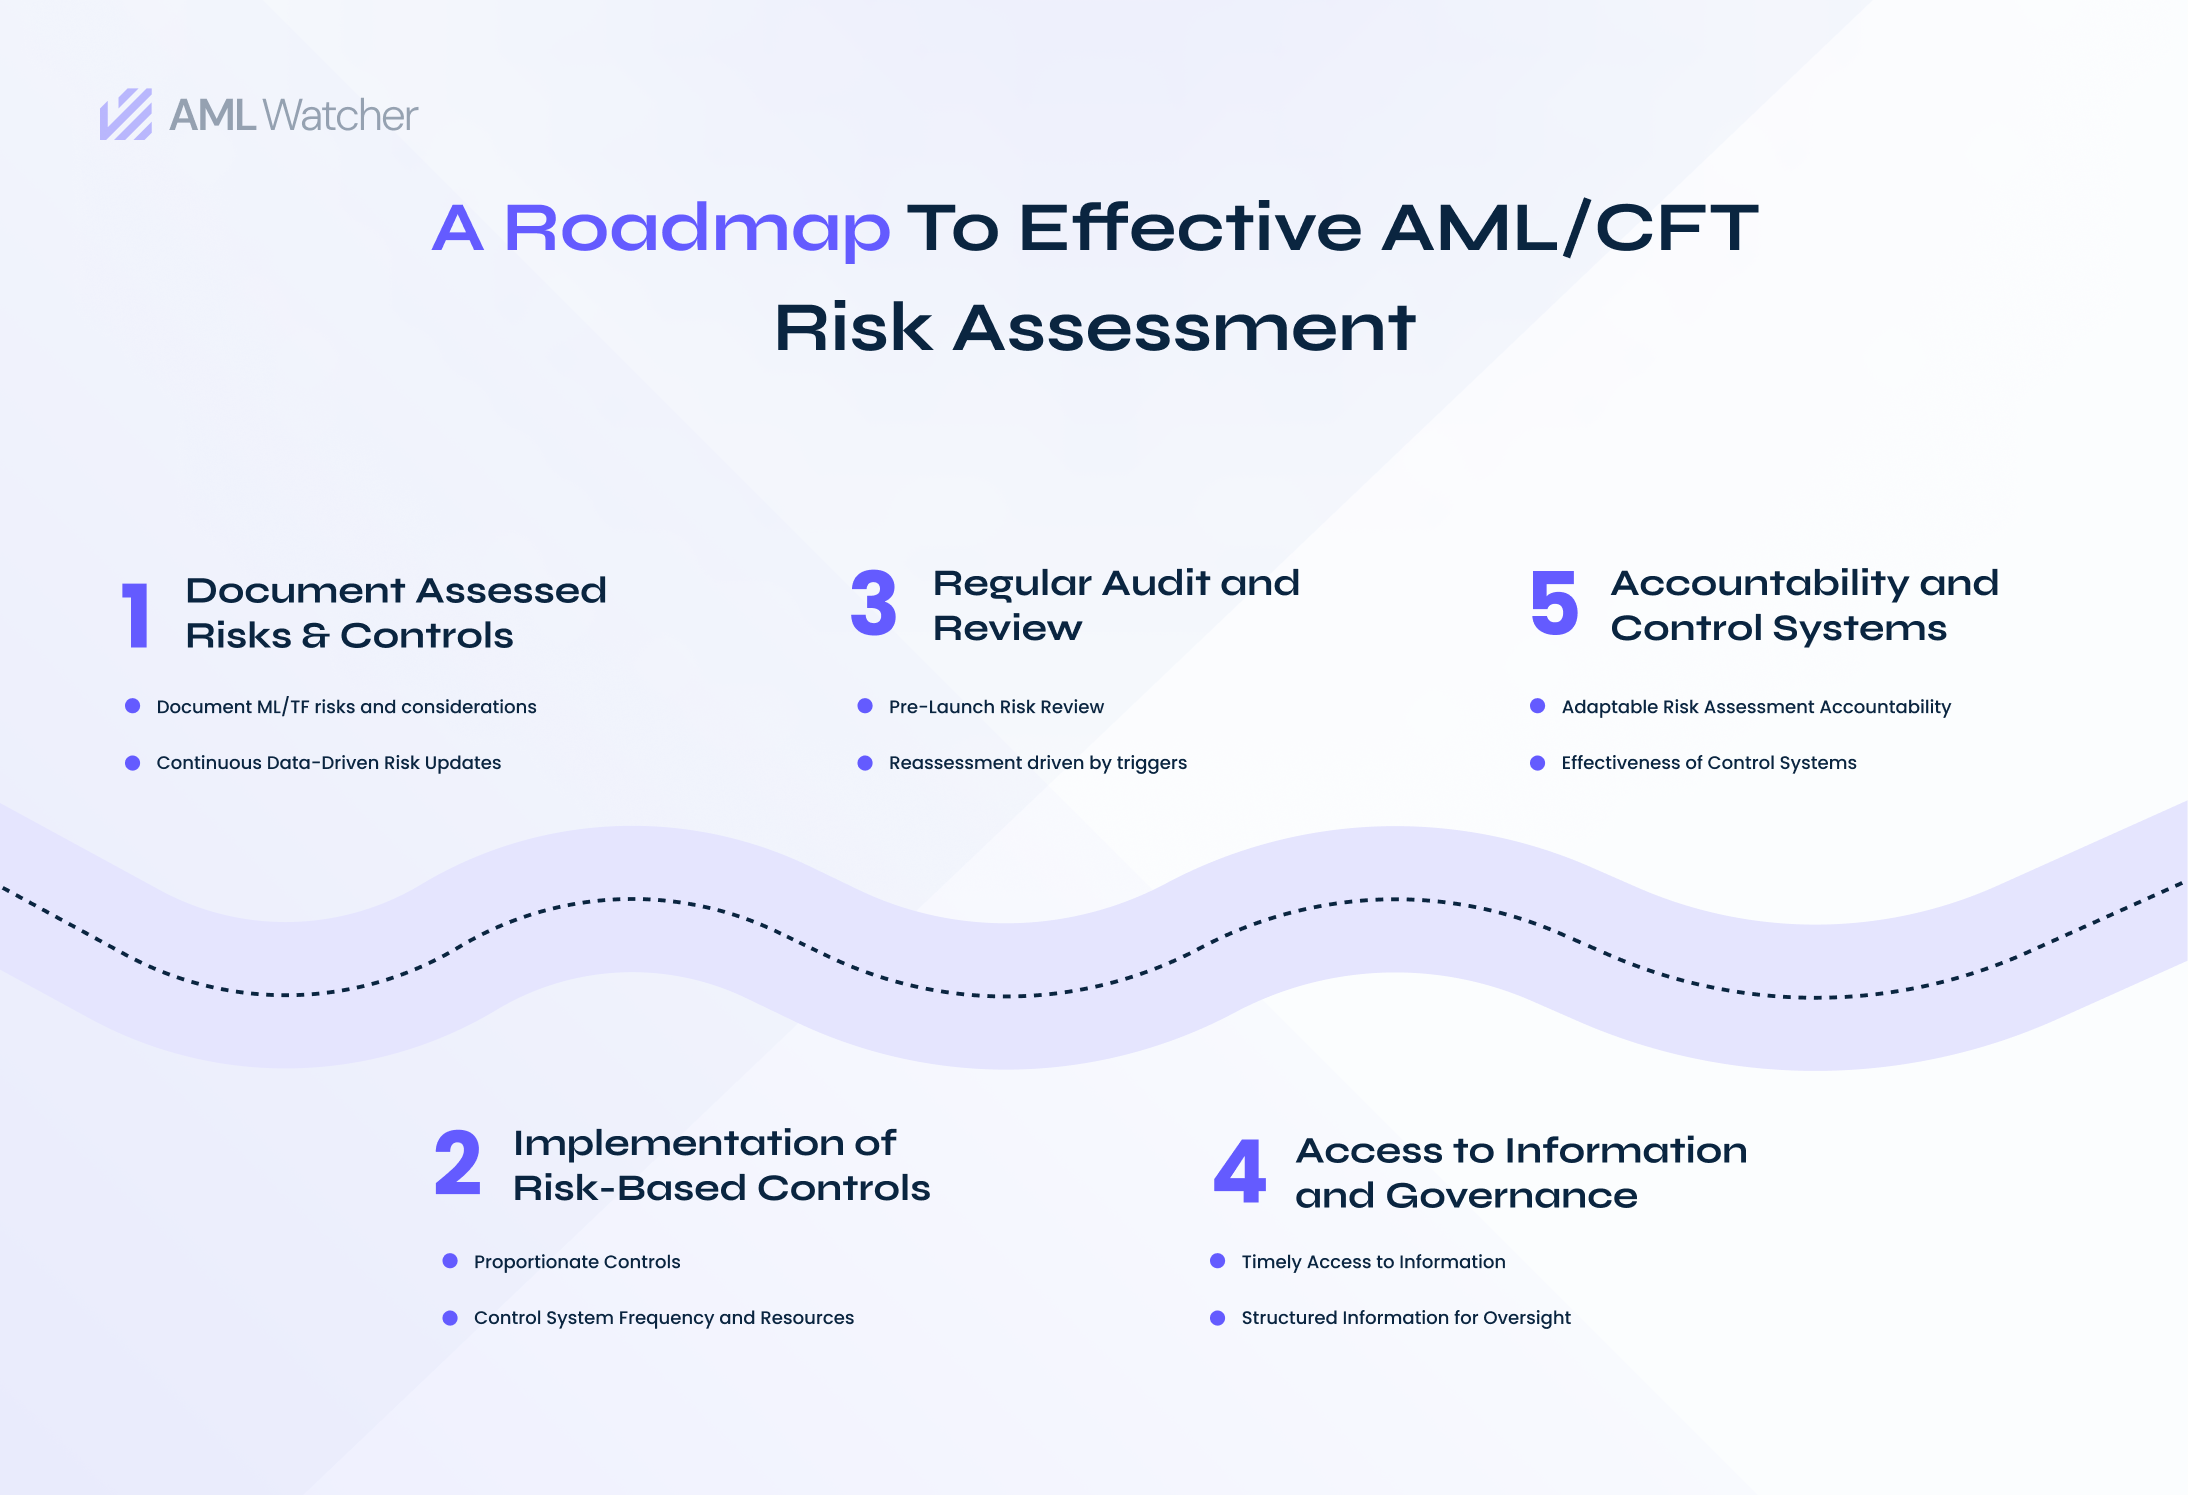 the featured image comprehensively demonstrates the step by step process on how to conduct AML/CFT risk assessment.